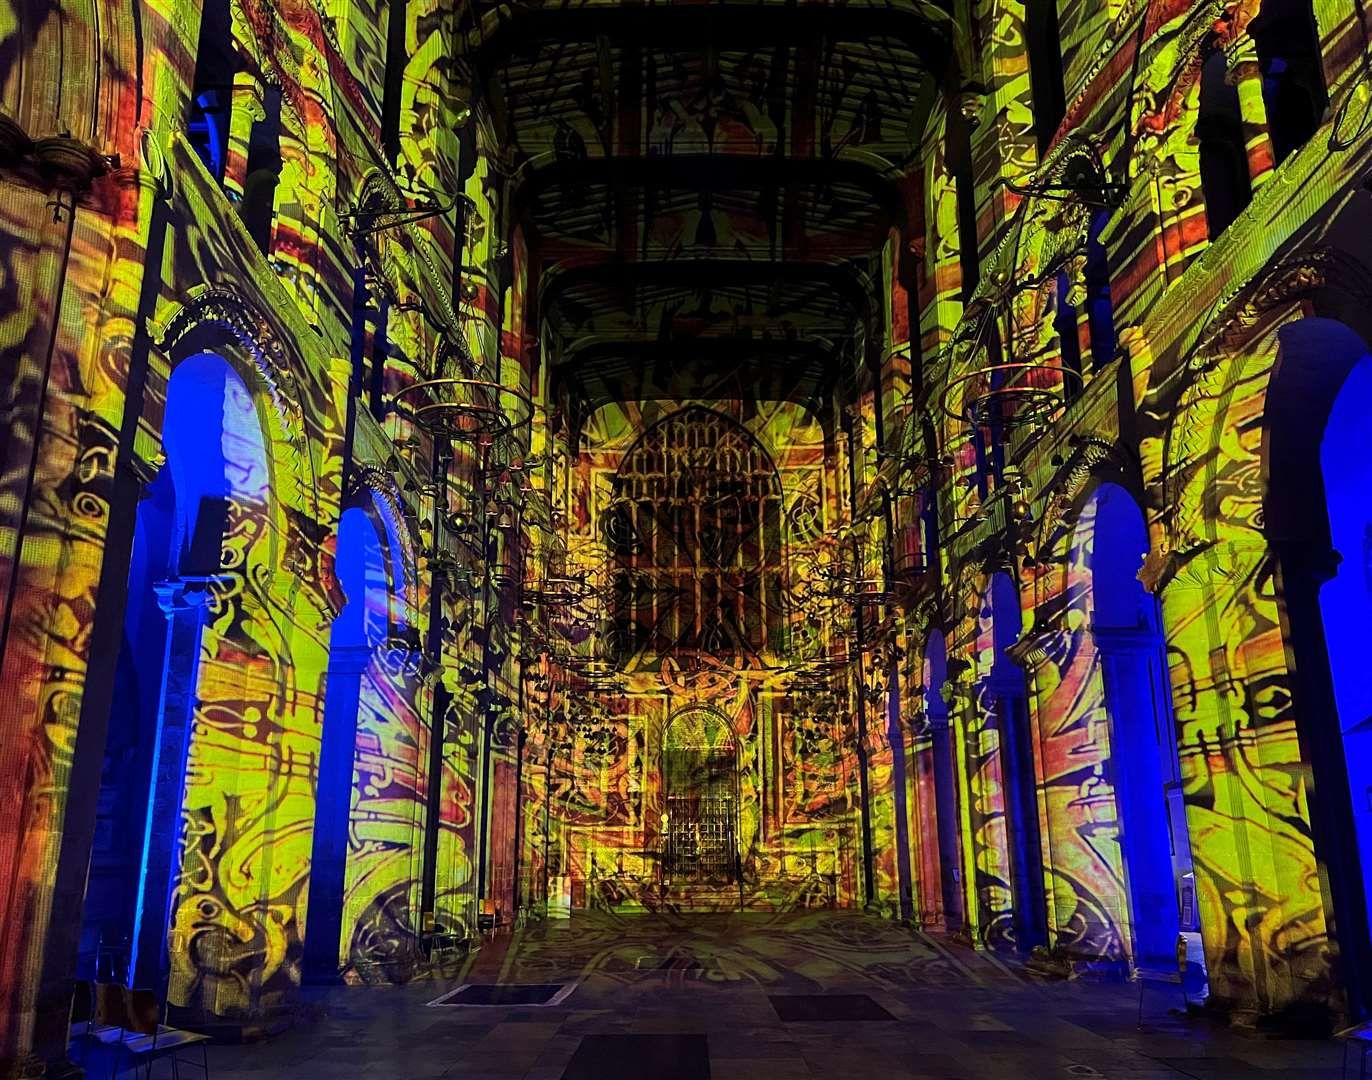 'Science' will feature sound and light through individual art installations